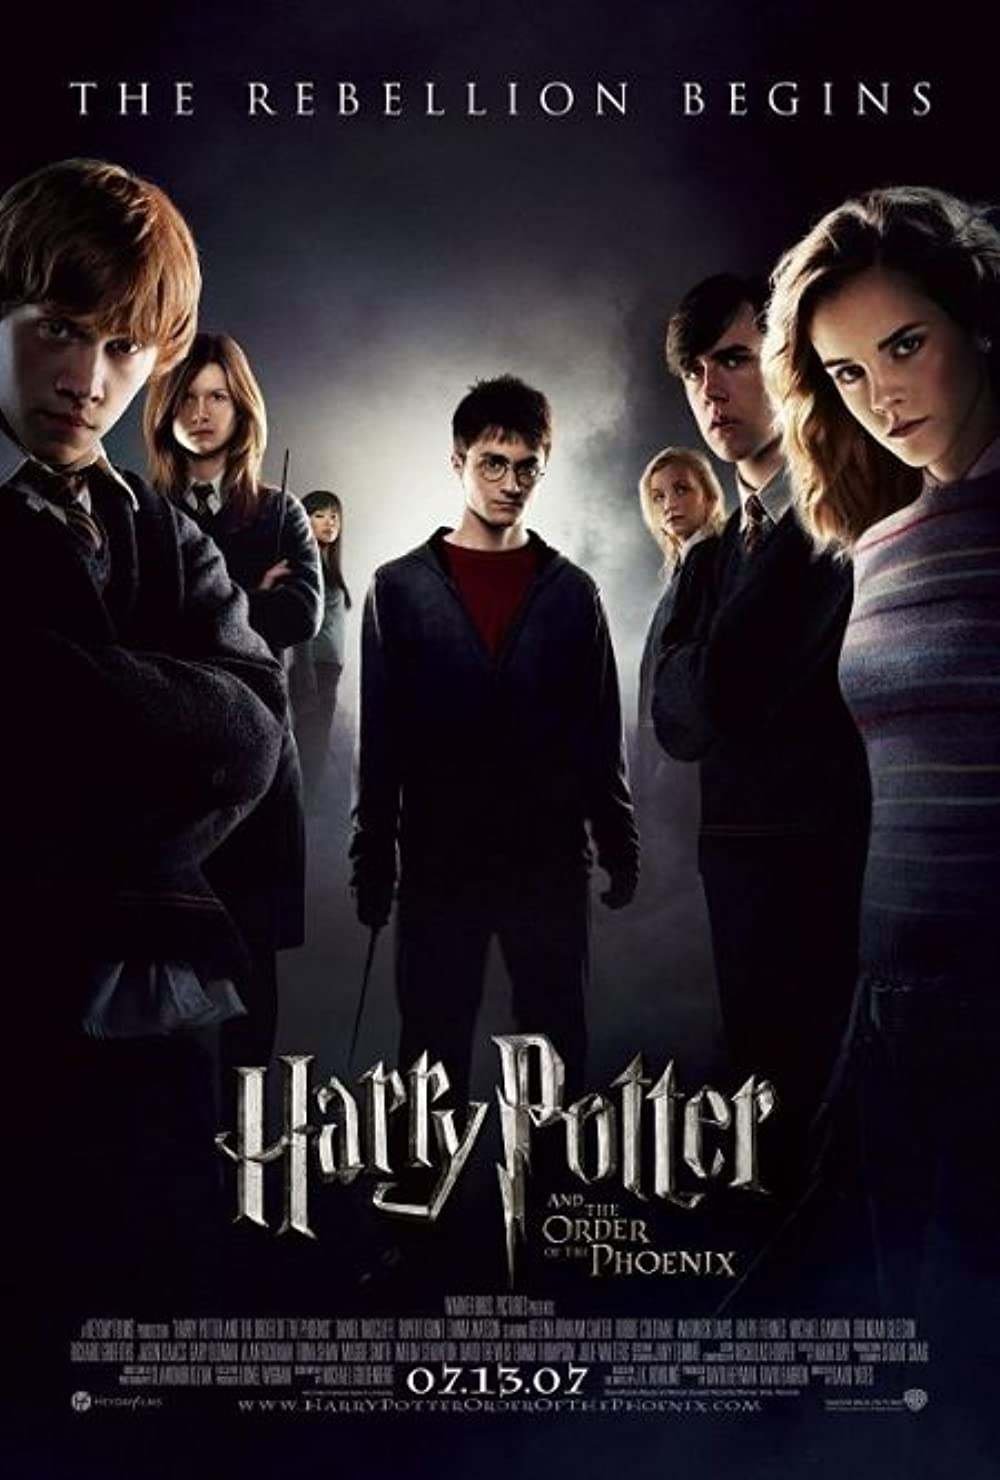 Harry Potter and the Order of the Phoenix (2007) Review